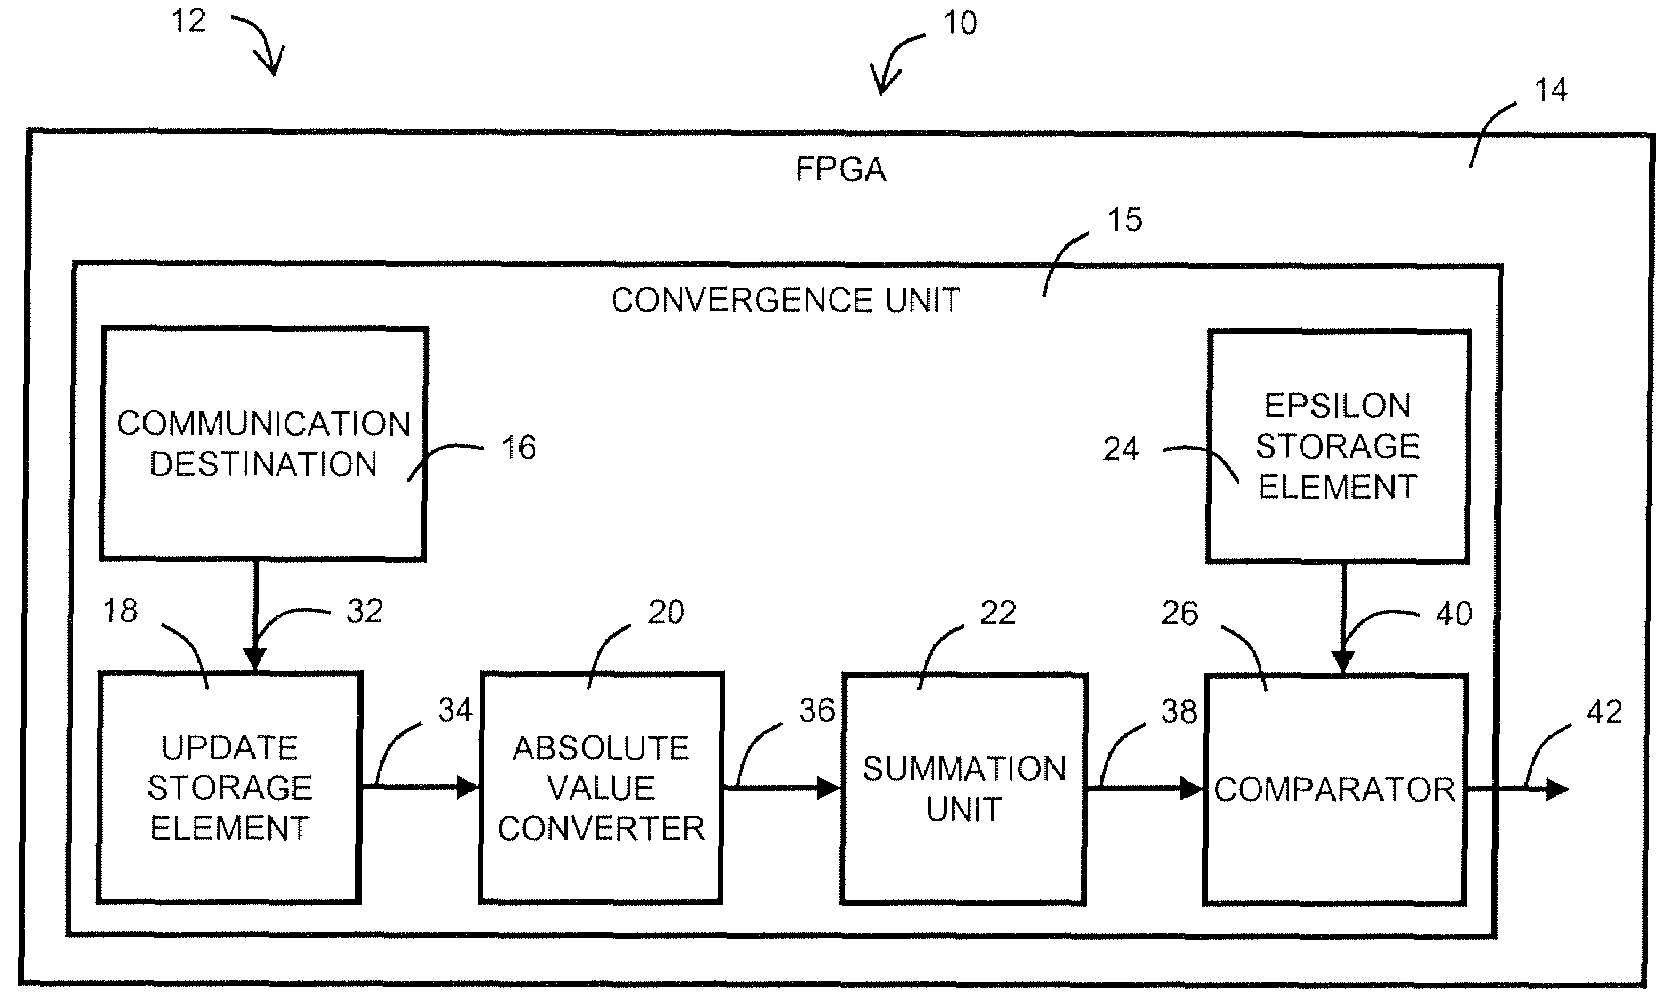 System for convergence evaluation for stationary method iterative linear solvers